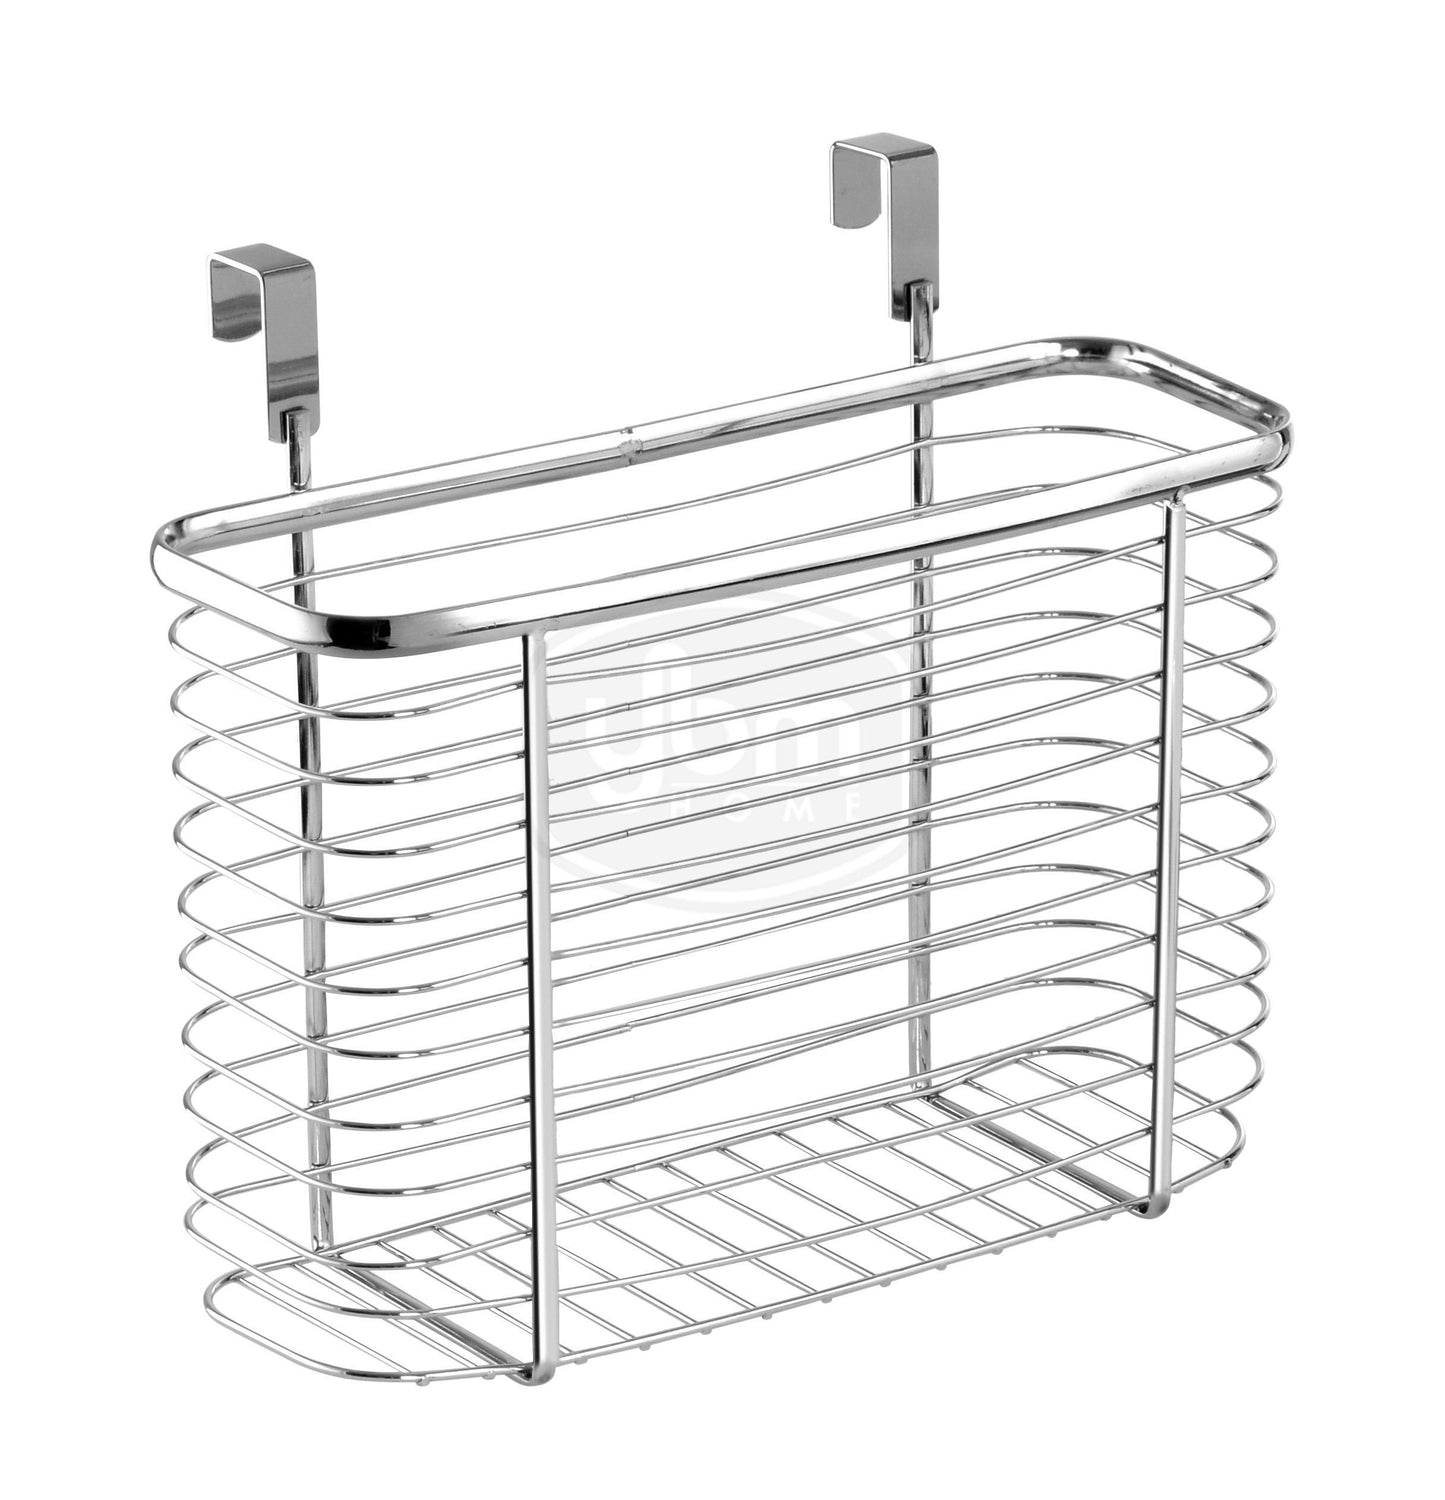 Selection ybm home ybmhome over the cabinet door kitchen storage organizer holder basket pantry caddy wrap rack for sandwich bags cleaning supplies chrome 2234 1 medium